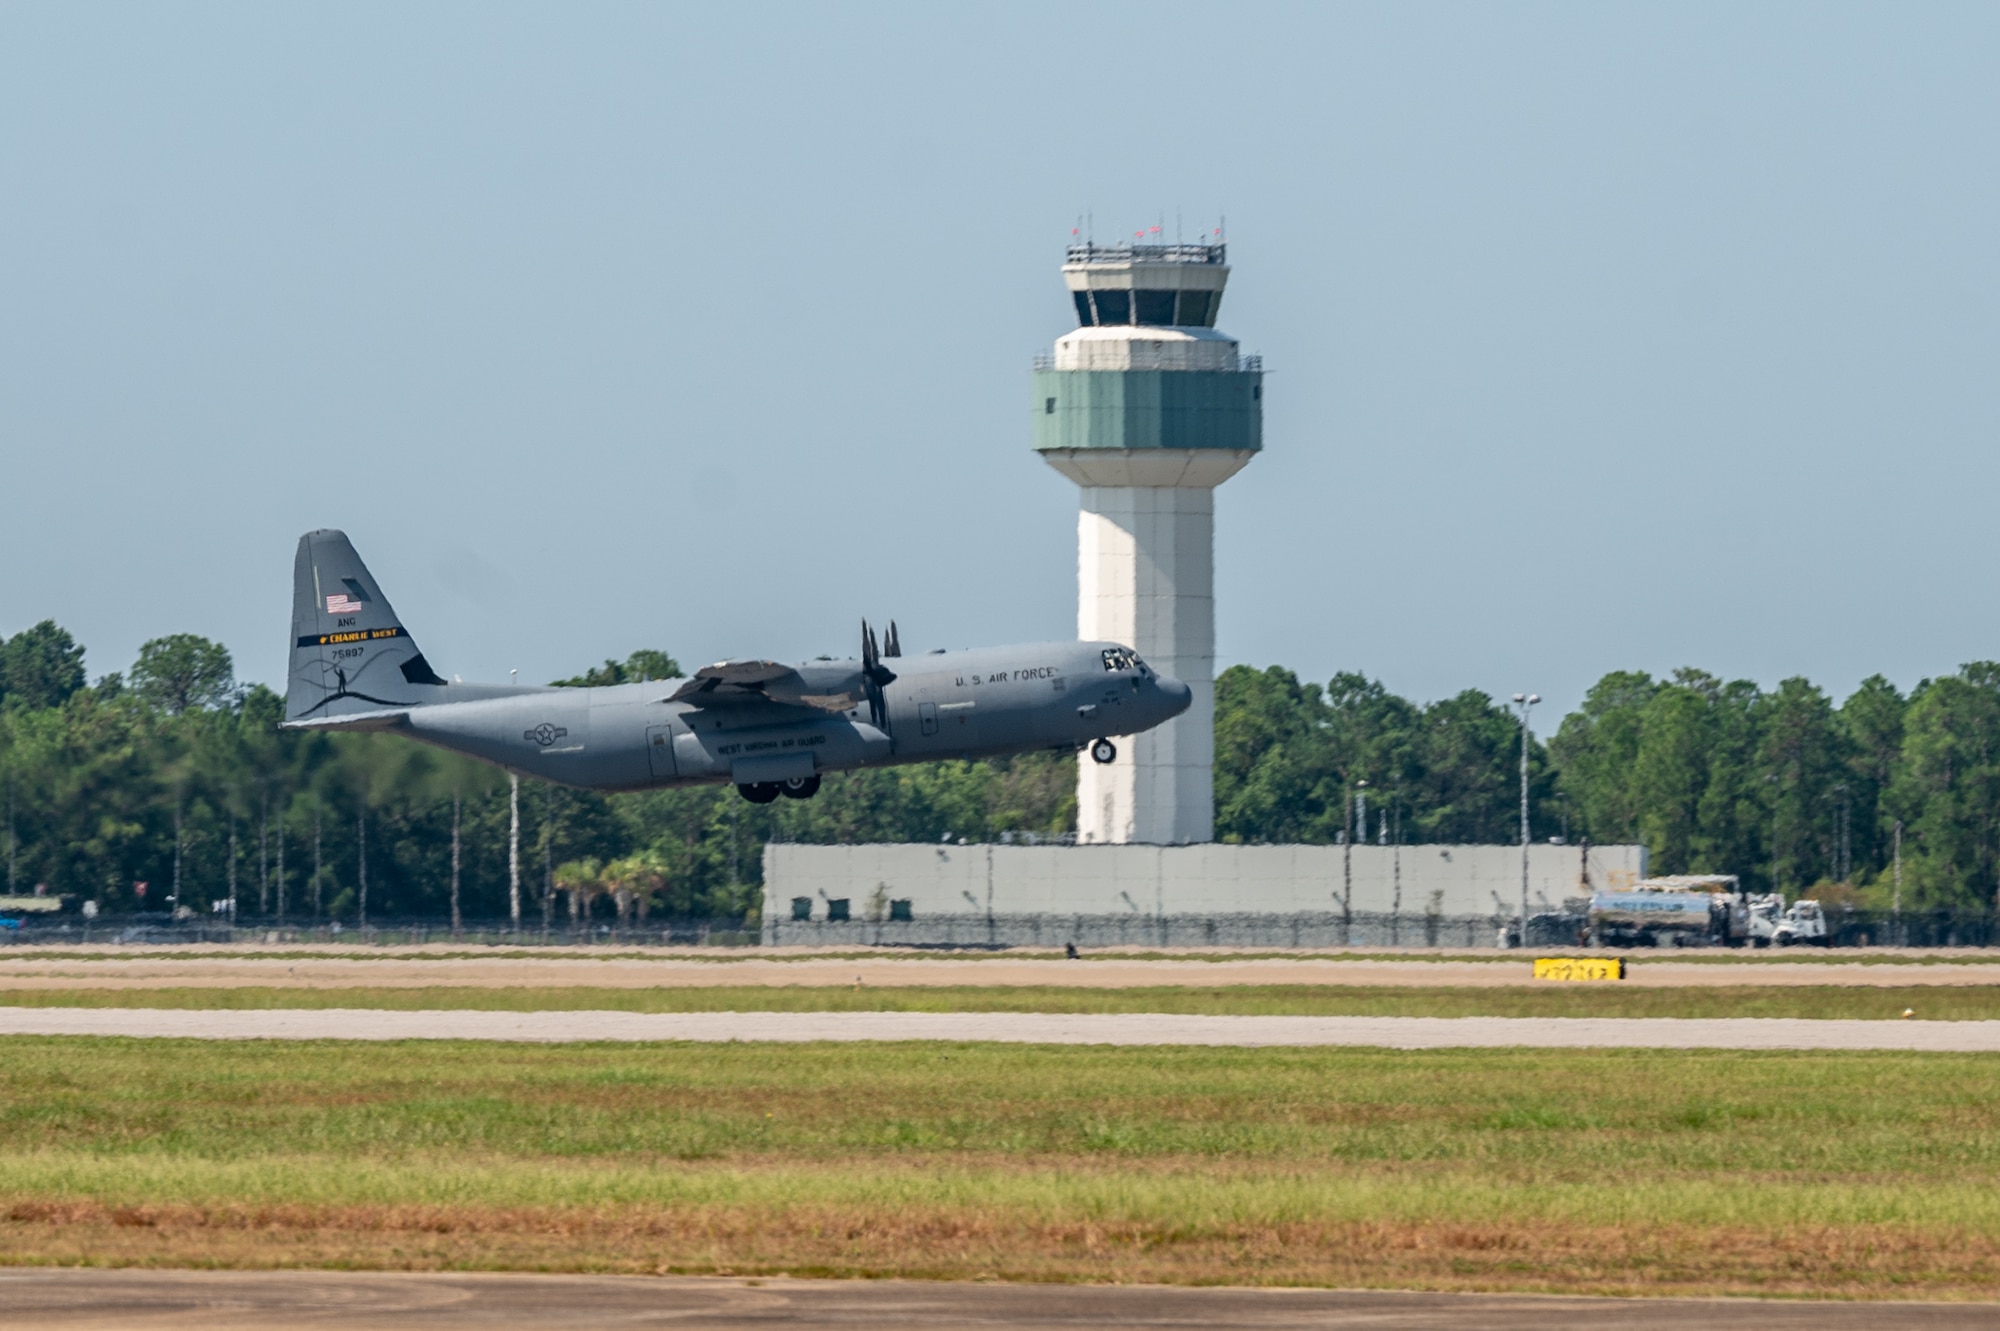 A C-130J-30 assigned to the 130th Airlift Wing, McLaughlin Air National Guard Base, W.Va., takes off during the unit's Fly Away Readiness Exercise Validation (FLARE-V) held at the Gulfport Combat Readiness Training Center (CRTC), Gulfport, Miss Sept. 8, 2023. FLARE-V is a part of the Air Forces' larger mechanism of continuous assessment by the wing, the MAJCOM, and the service through a series of evaluative events, including scalable wing-level exercises, joint exercises, complex and operationally informed training events, real-world deployments and the validation of readiness reporting procedures. (U.S. Air National Guard photo by 2nd Lt. De-Juan Haley)